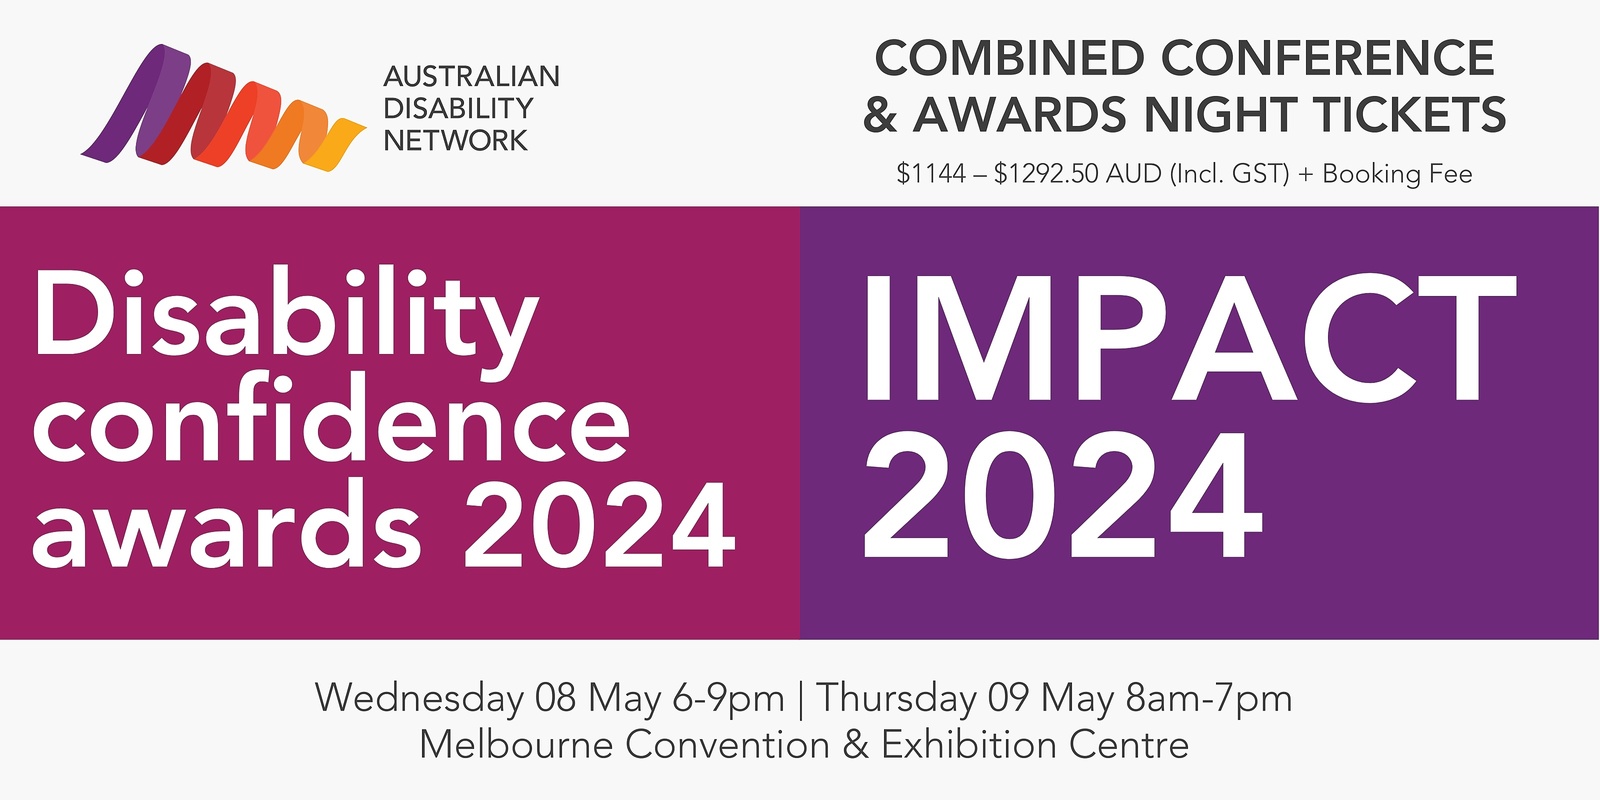 Banner image for Australian Disability Network - 2024 IMPACT Conference and Disability Confidence Awards